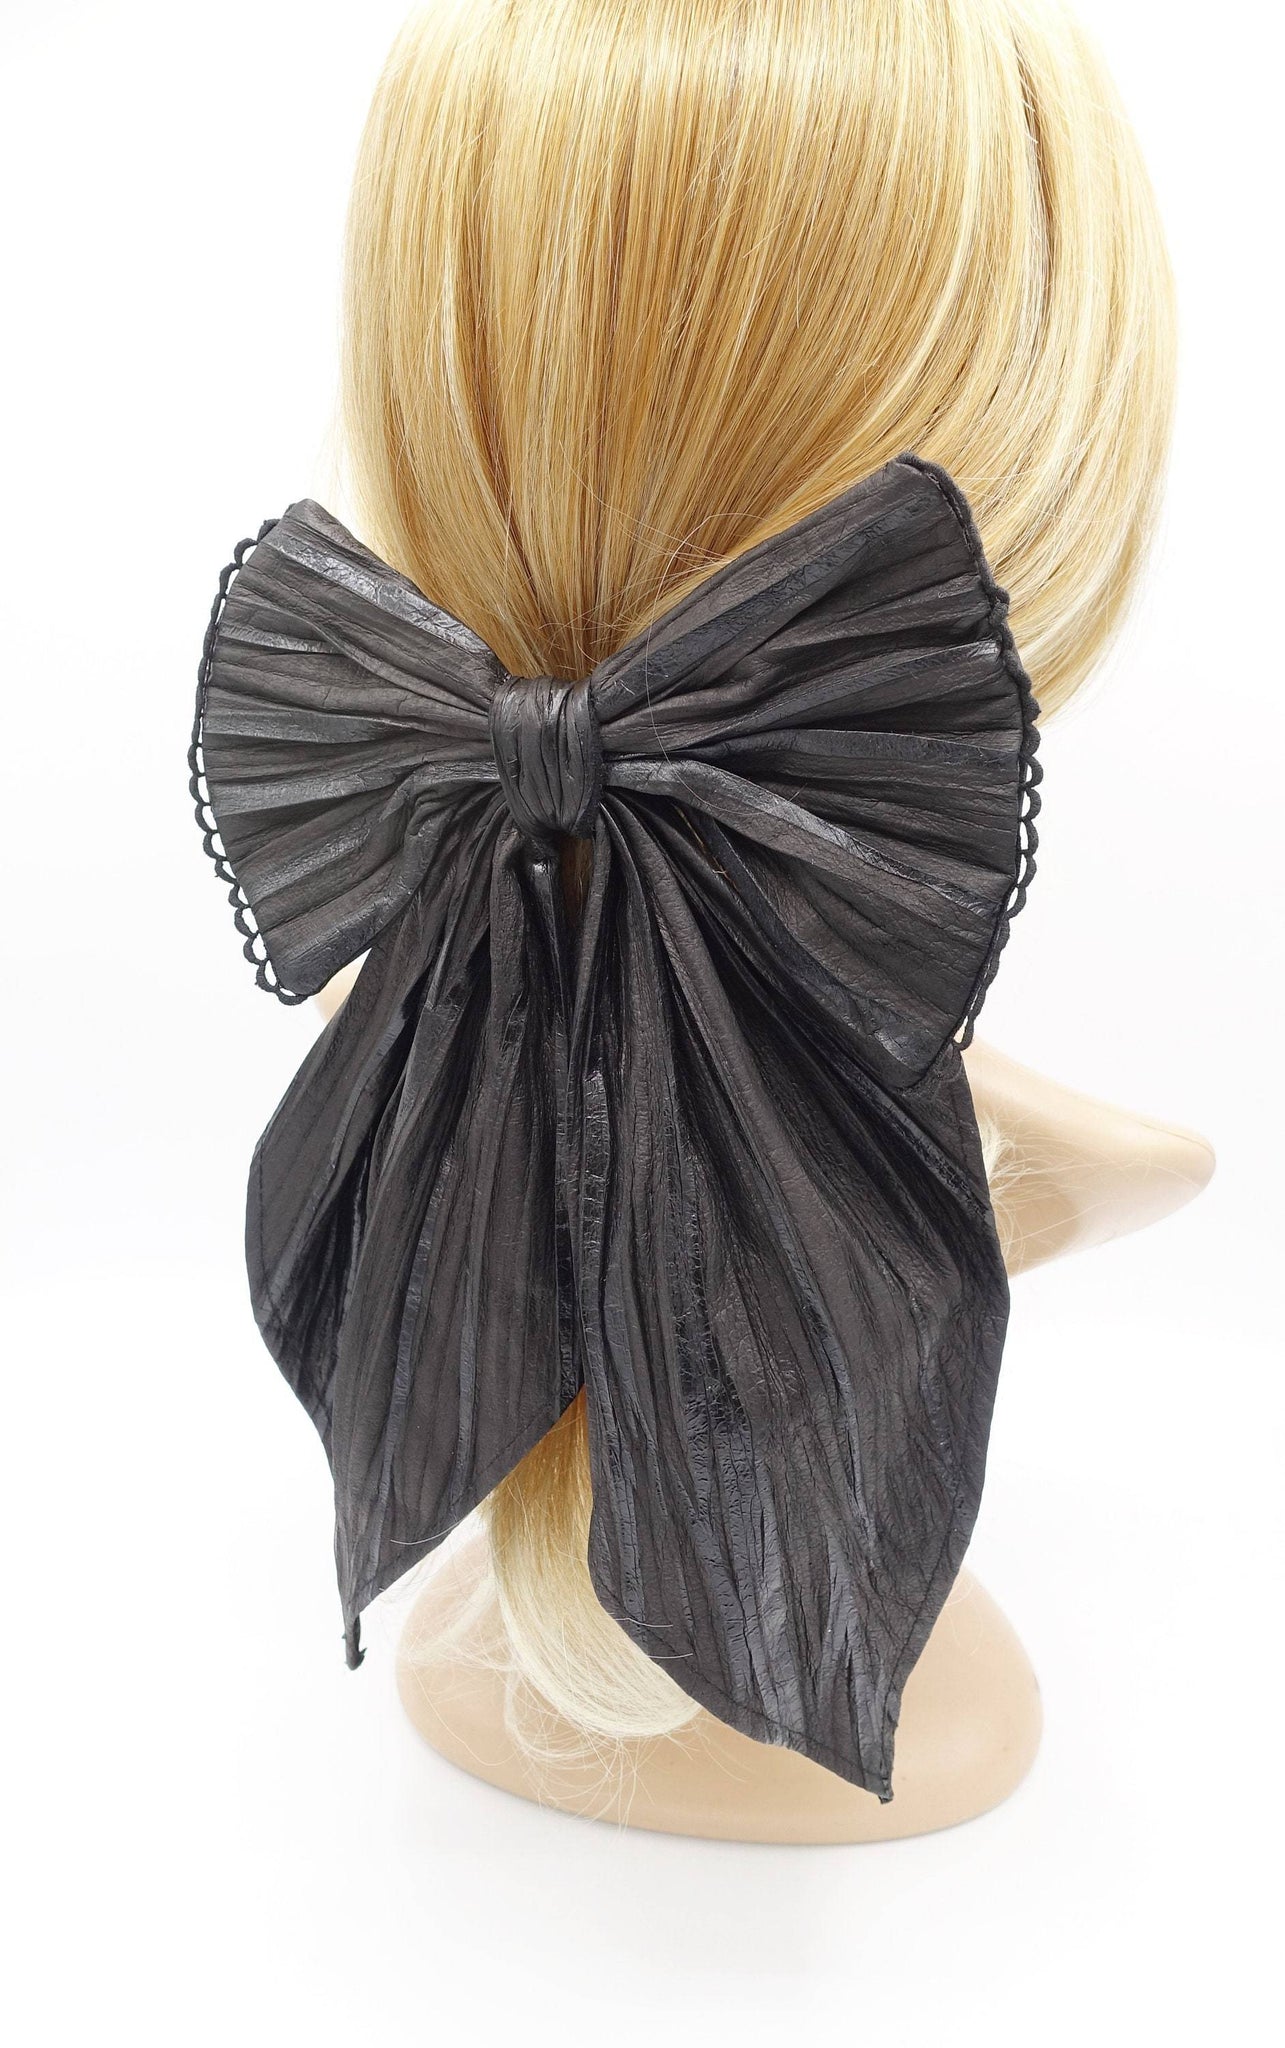 VeryShine leather pleats hair bow fashionista hair accessory for women